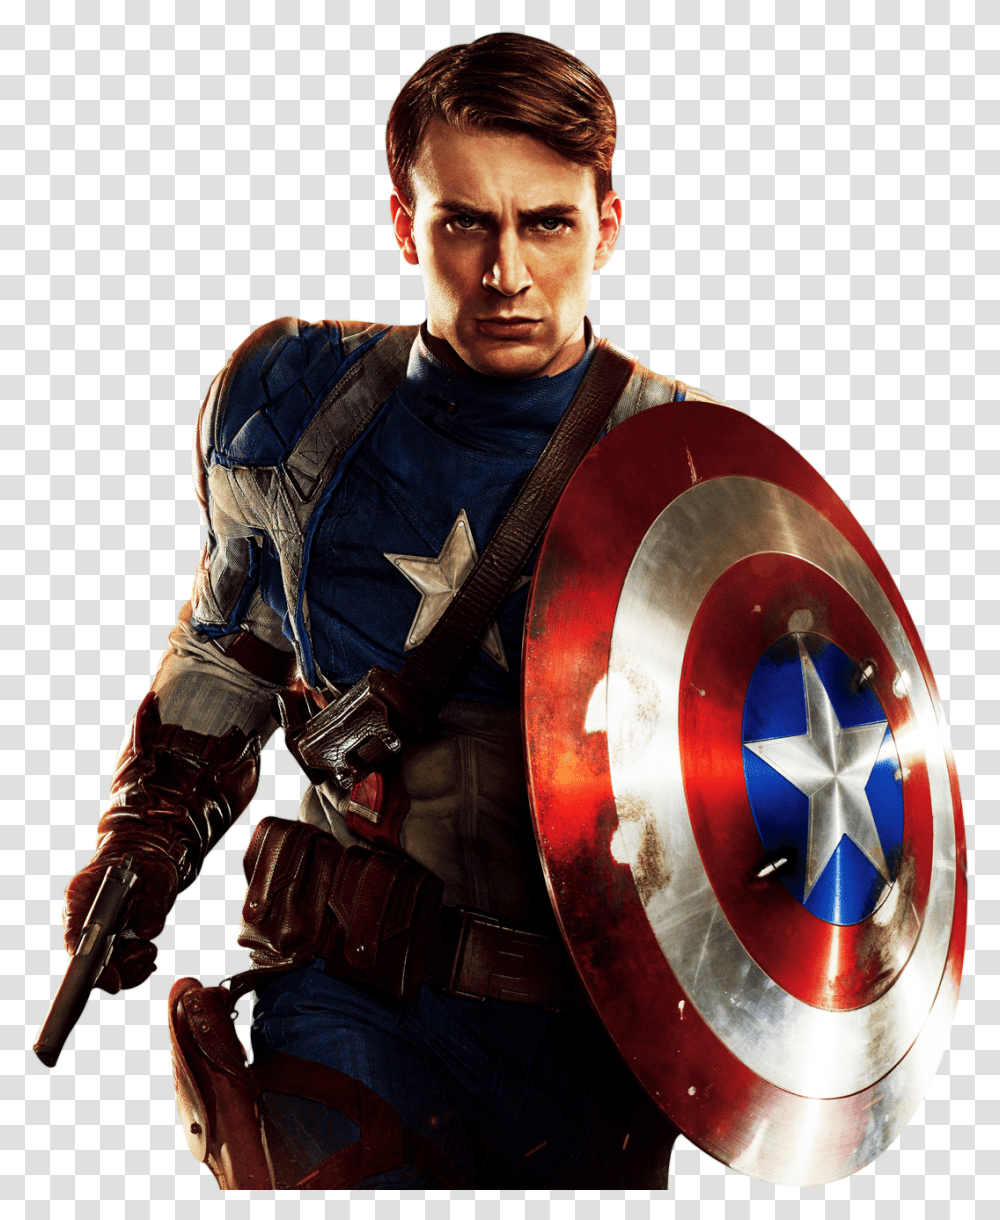 Captain America Image Background Captain America The First Avenger, Armor, Person, Human, Costume Transparent Png